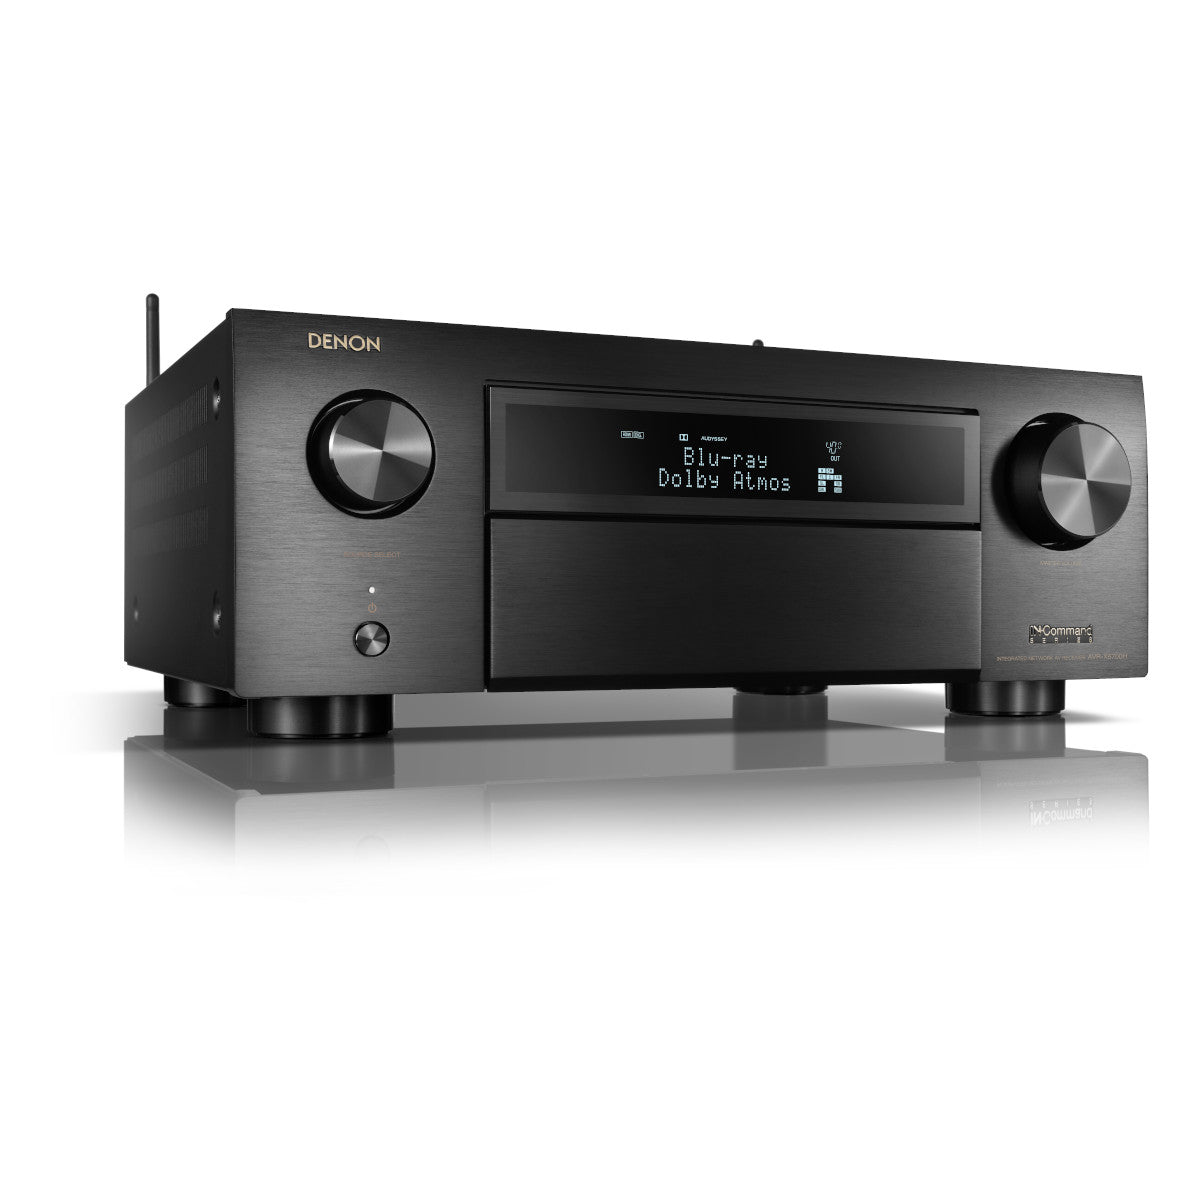 Denon AVR-X6700H 11.2-Channel 8K Home Theater Receiver with 3D Audio and Amazon Alexa Voice Control